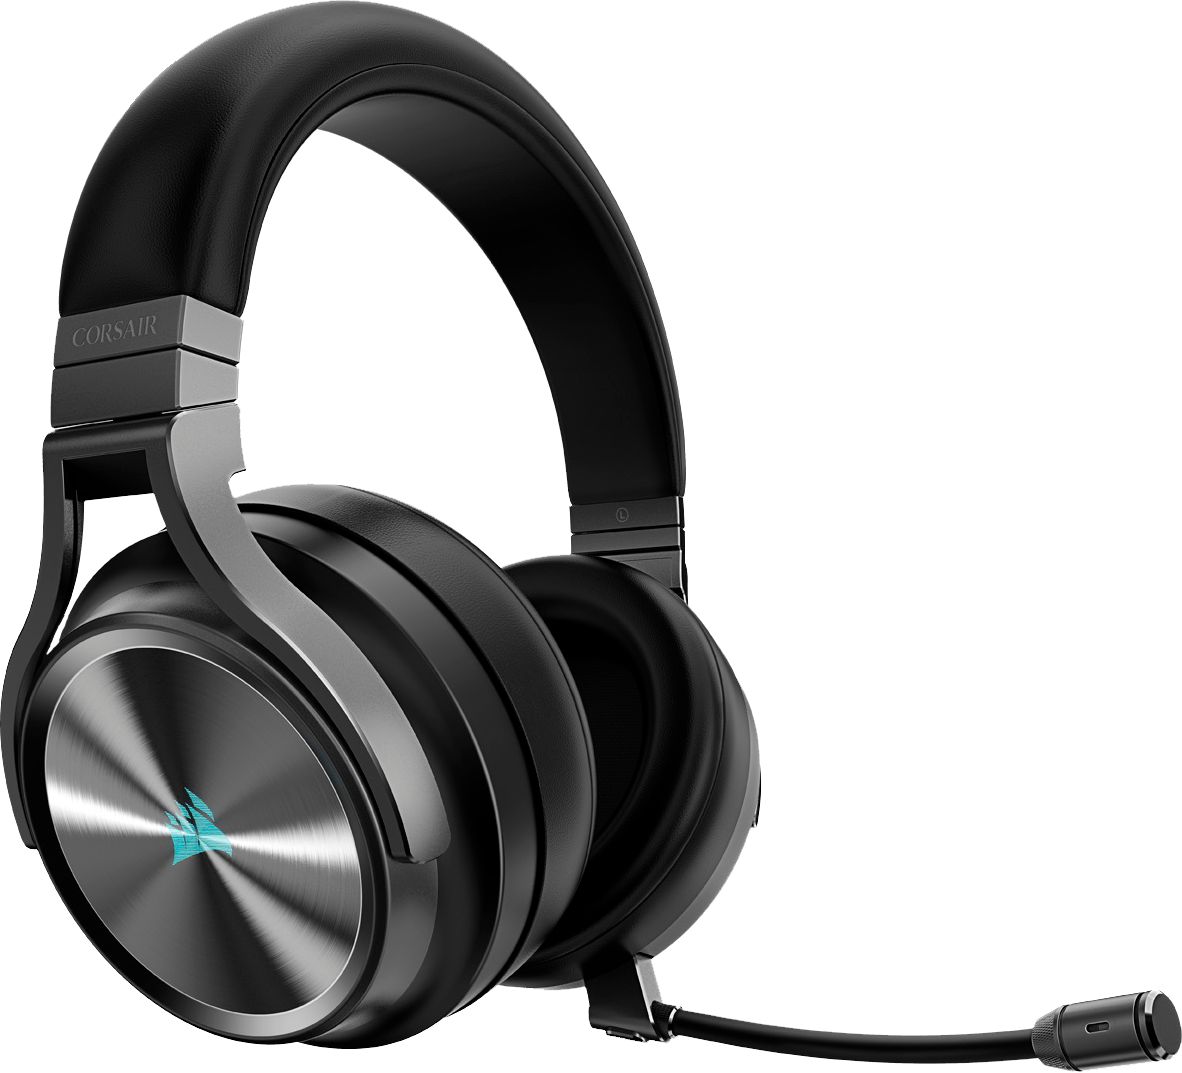 Angle View: CORSAIR - Refurbished Virtuoso RGB SE Wireless 7.1 Surround Sound Gaming Over-the-Ear Headset for PC/Mac, Game Consoles & Mobile - Gunmetal